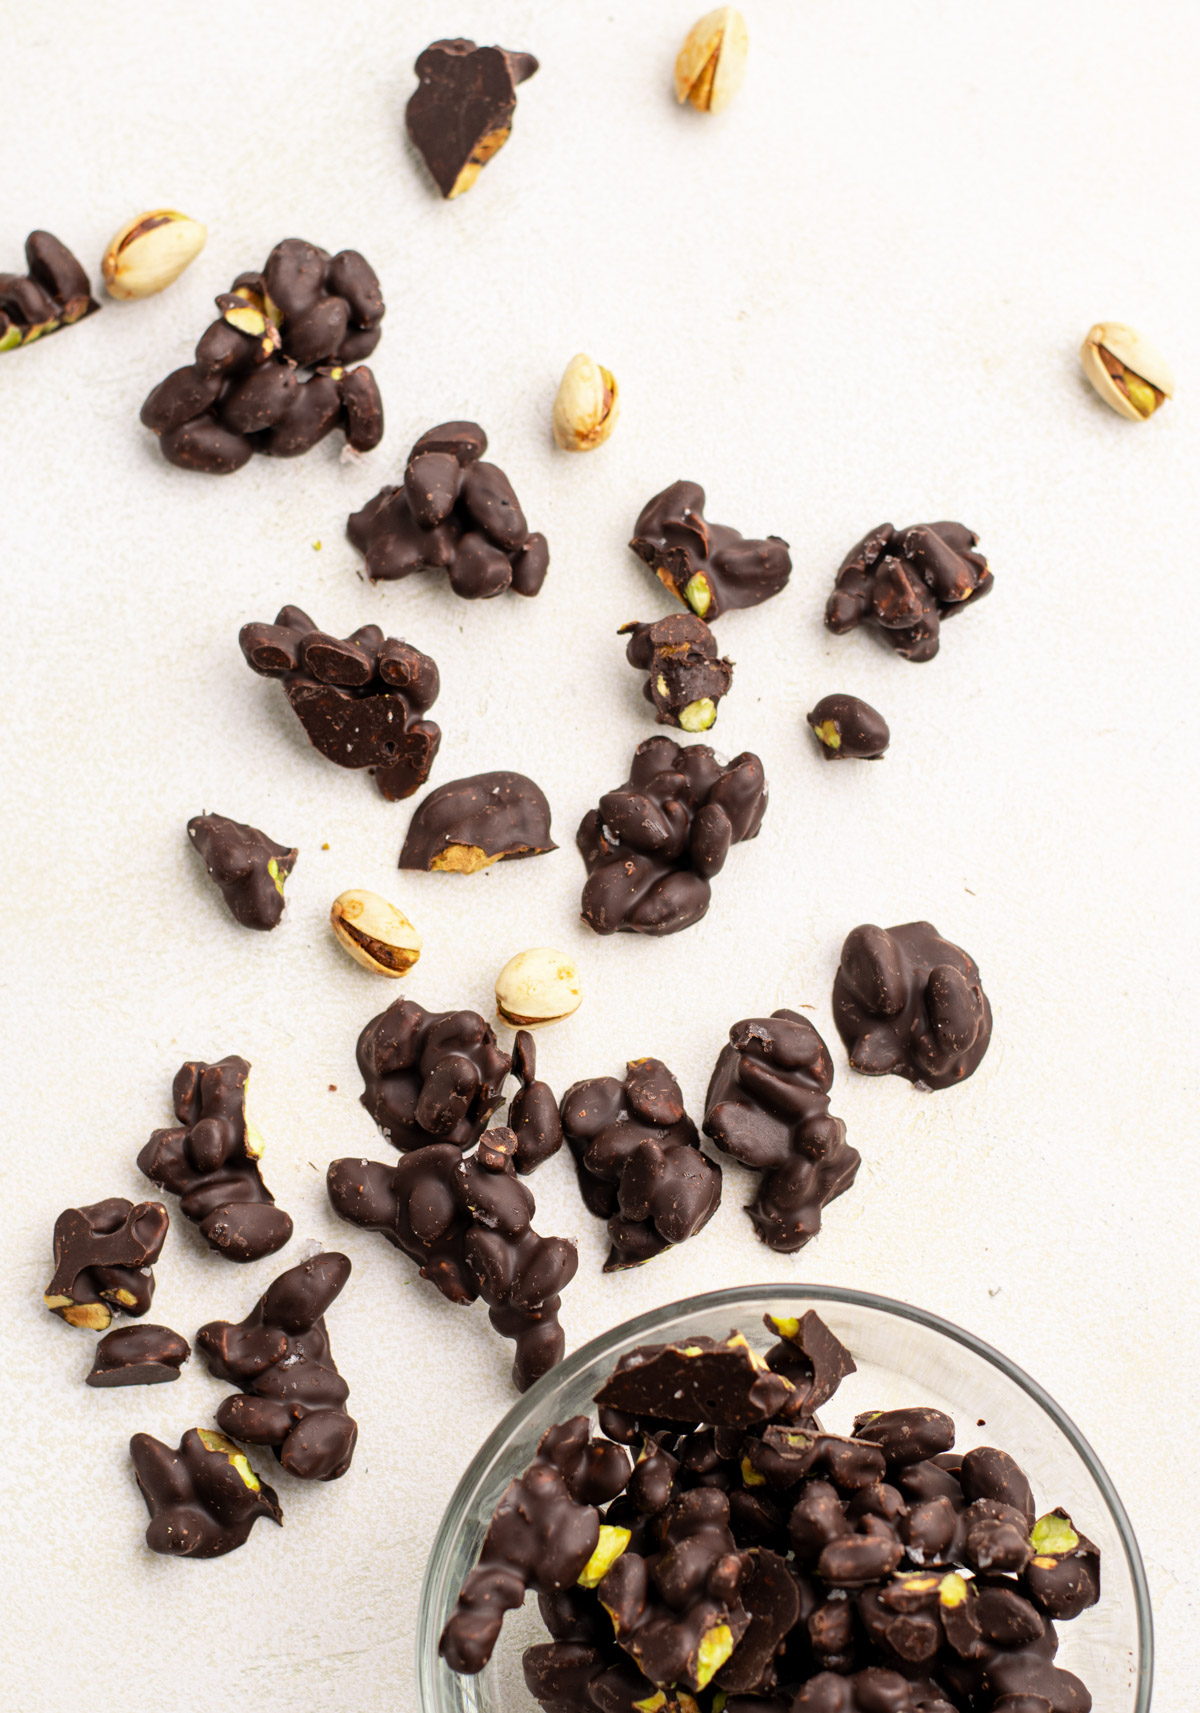 chocolate covered pistachio clusters scattered over a light backdrop.